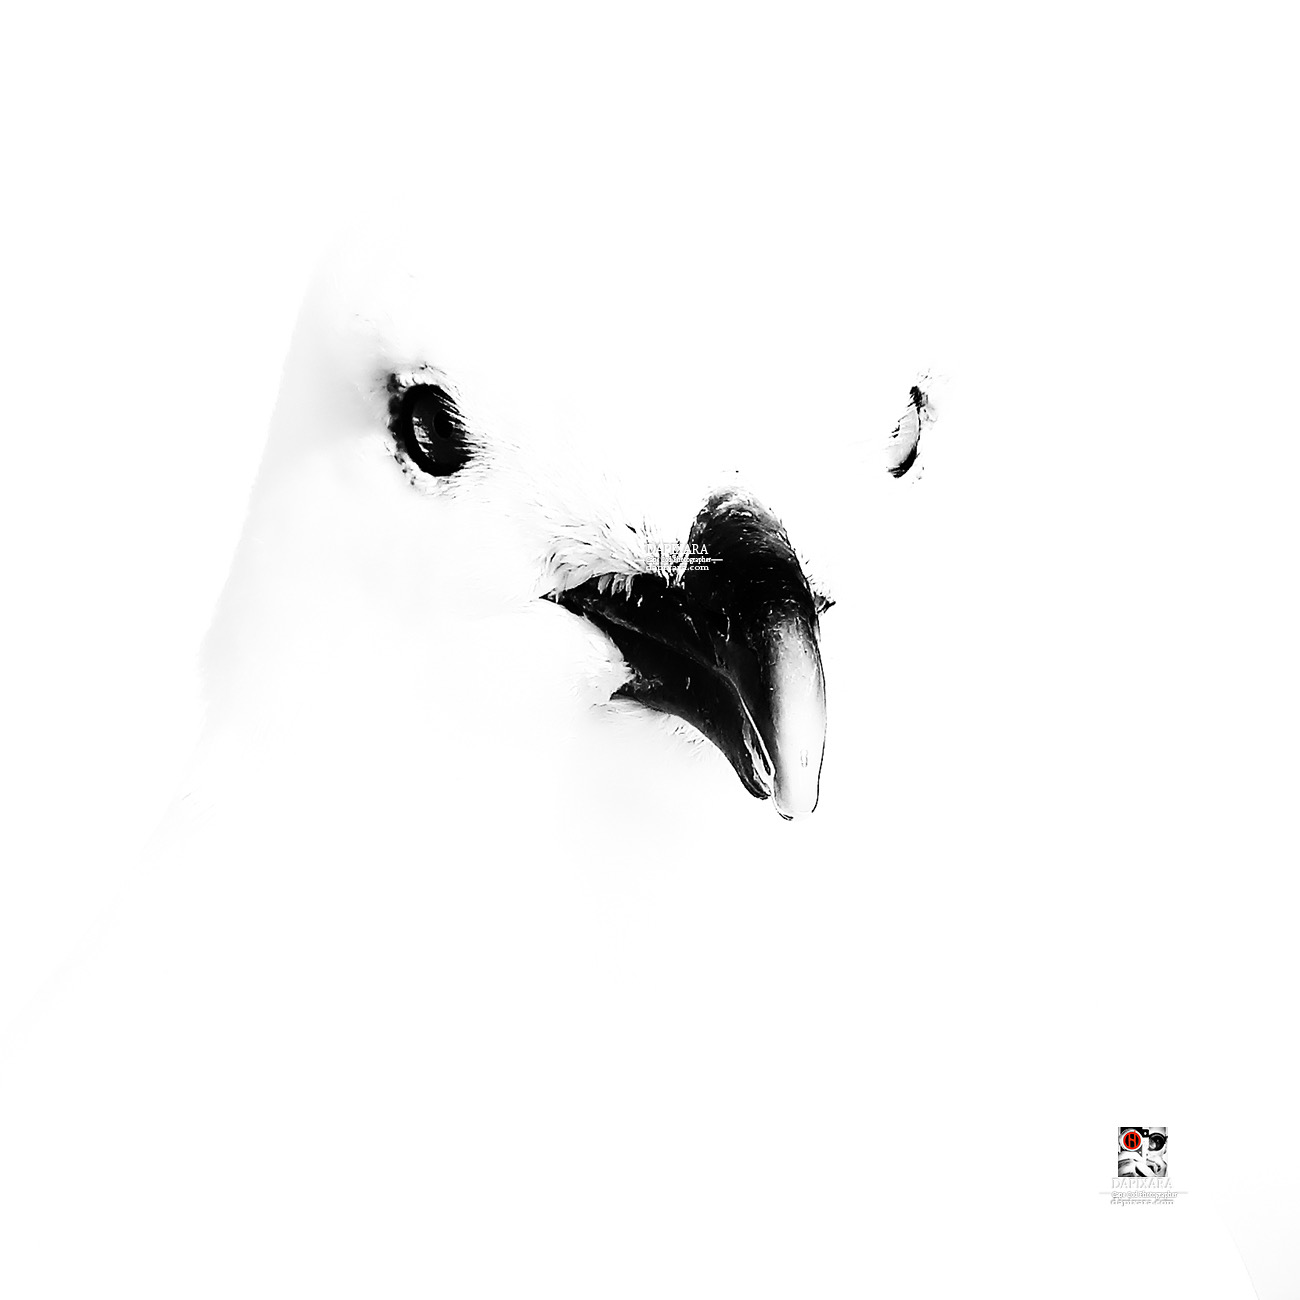 Seagull art black and white photography. Fine art bird print for sale by Dapixara.